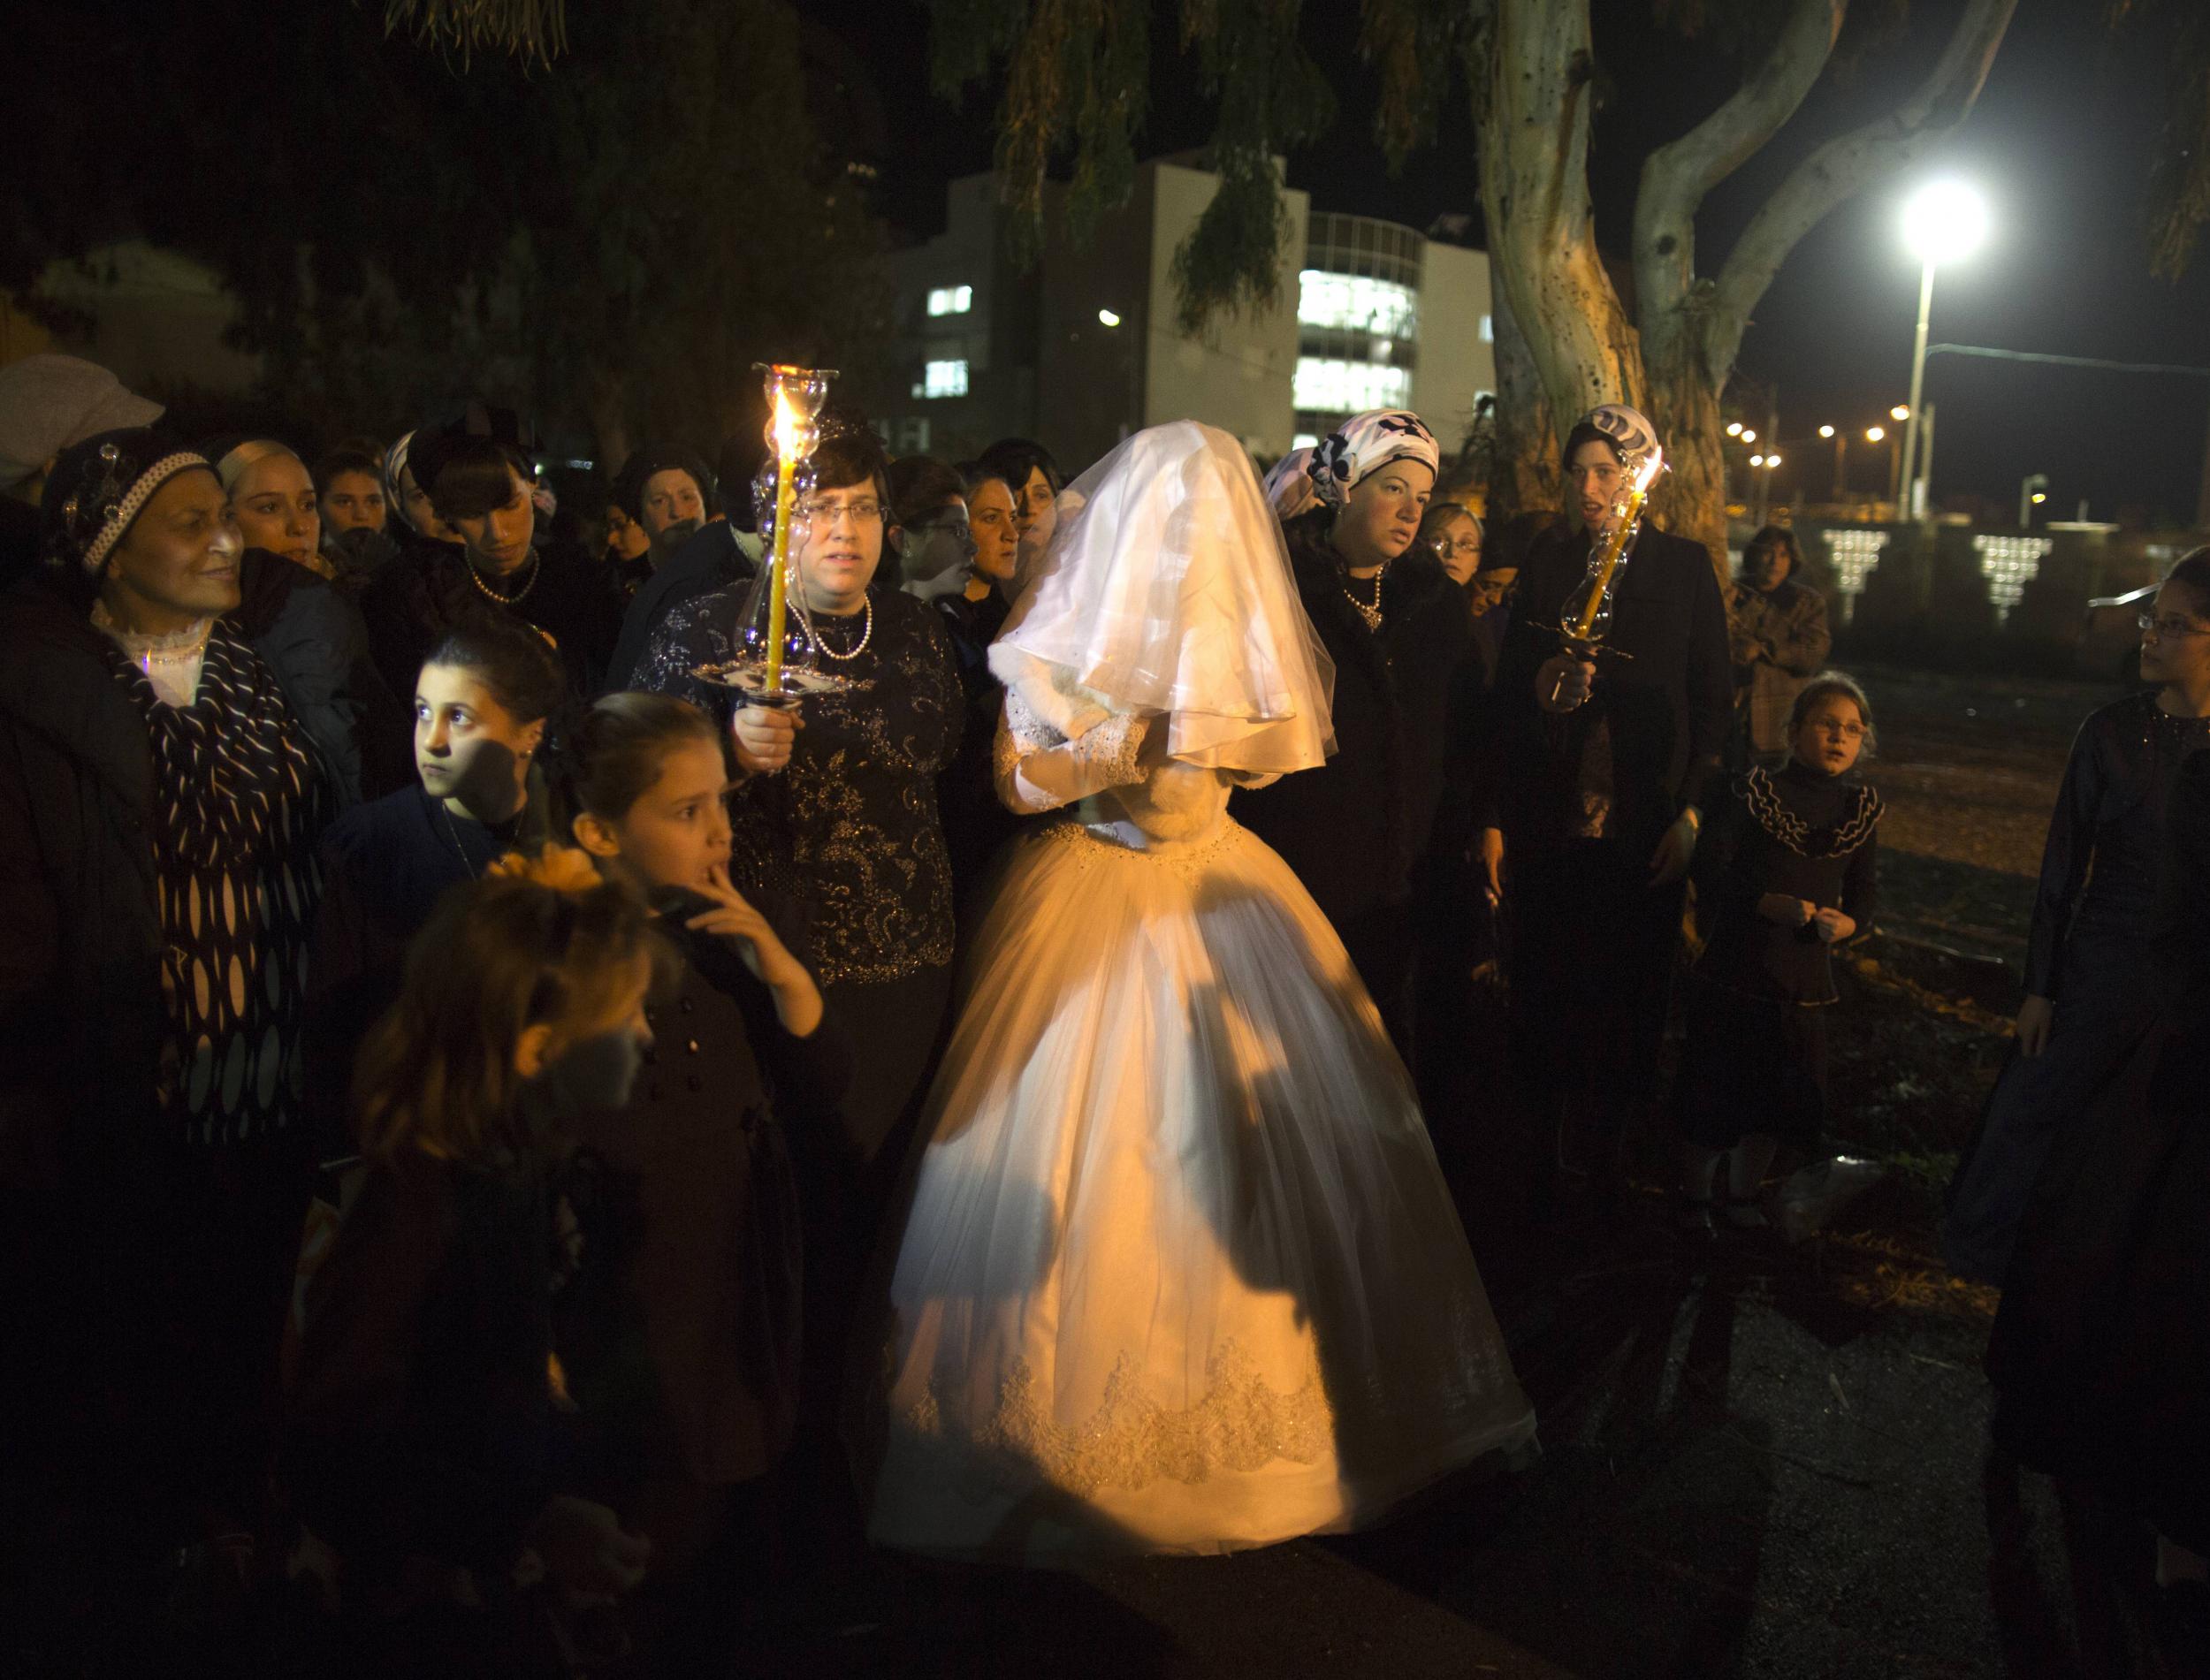 A Jewish woman arrives with family members for her orthodox wedding